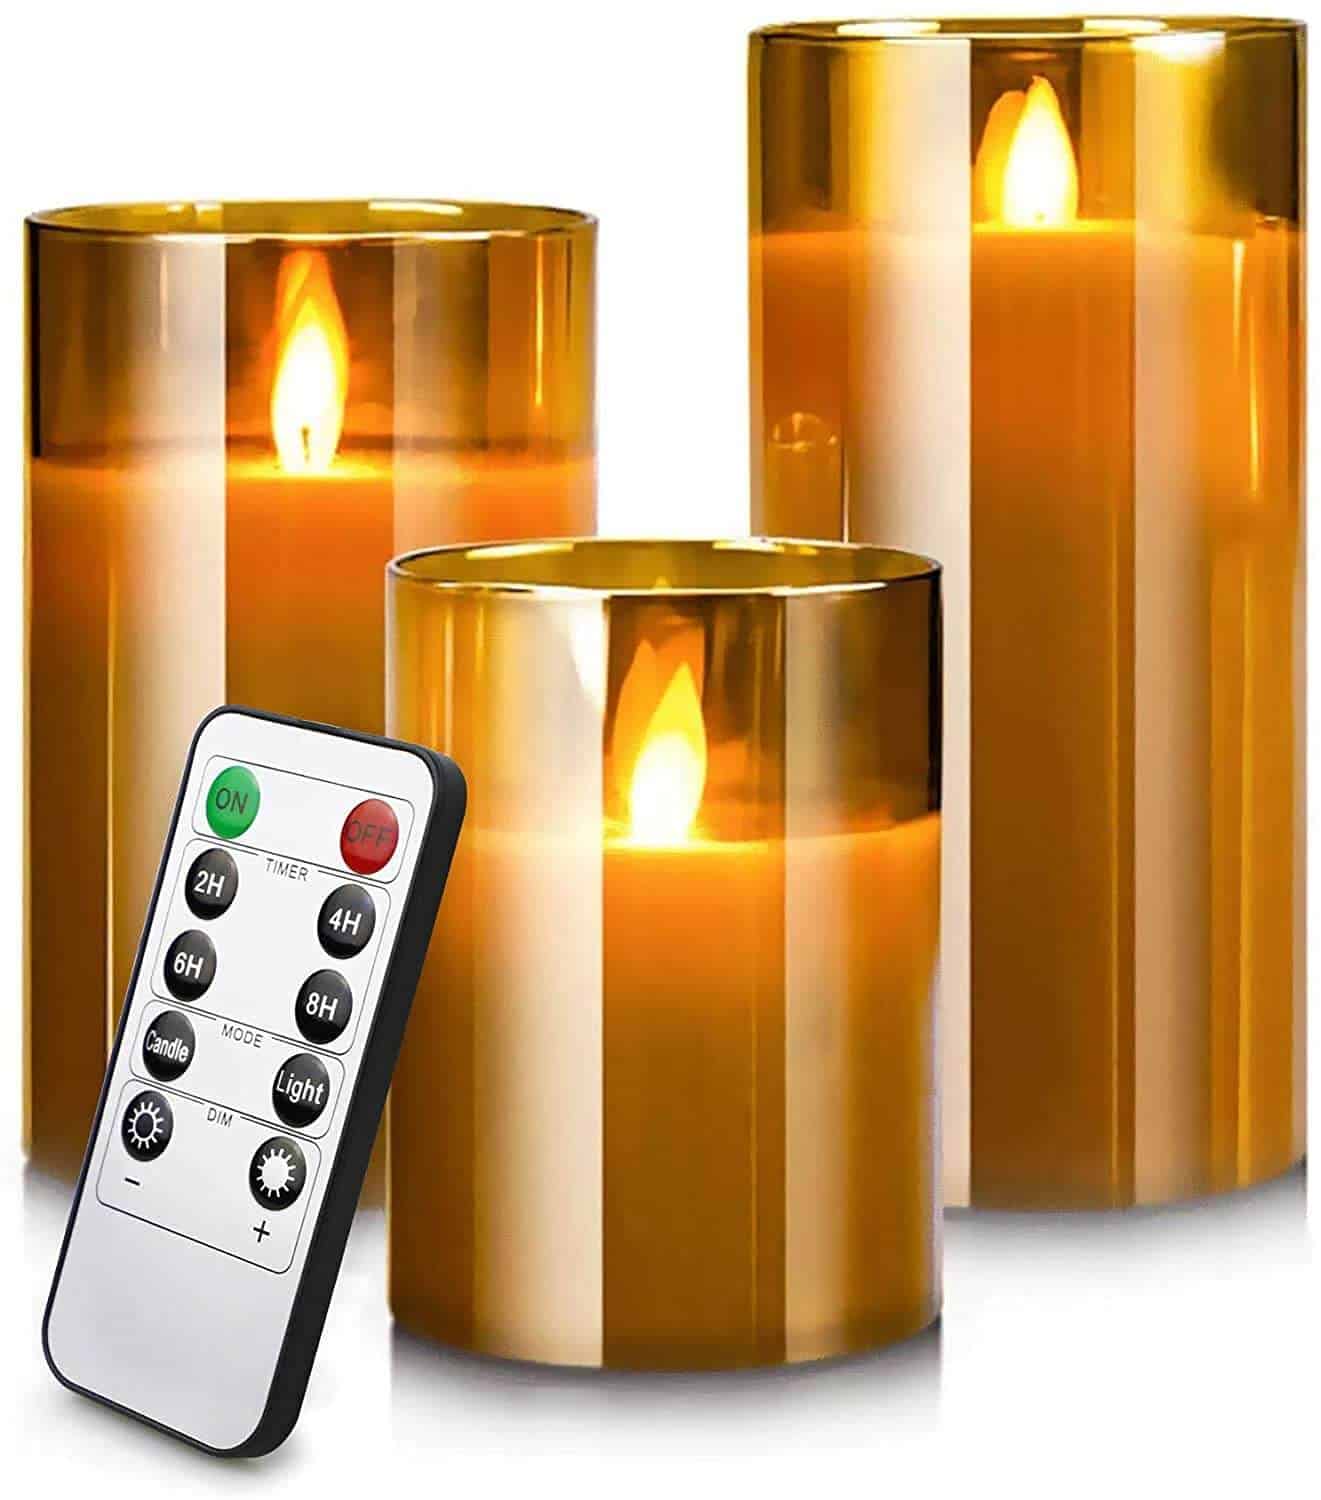 LED battery wind proof tealight Candle wedding table natural safe flame BUY QTY 